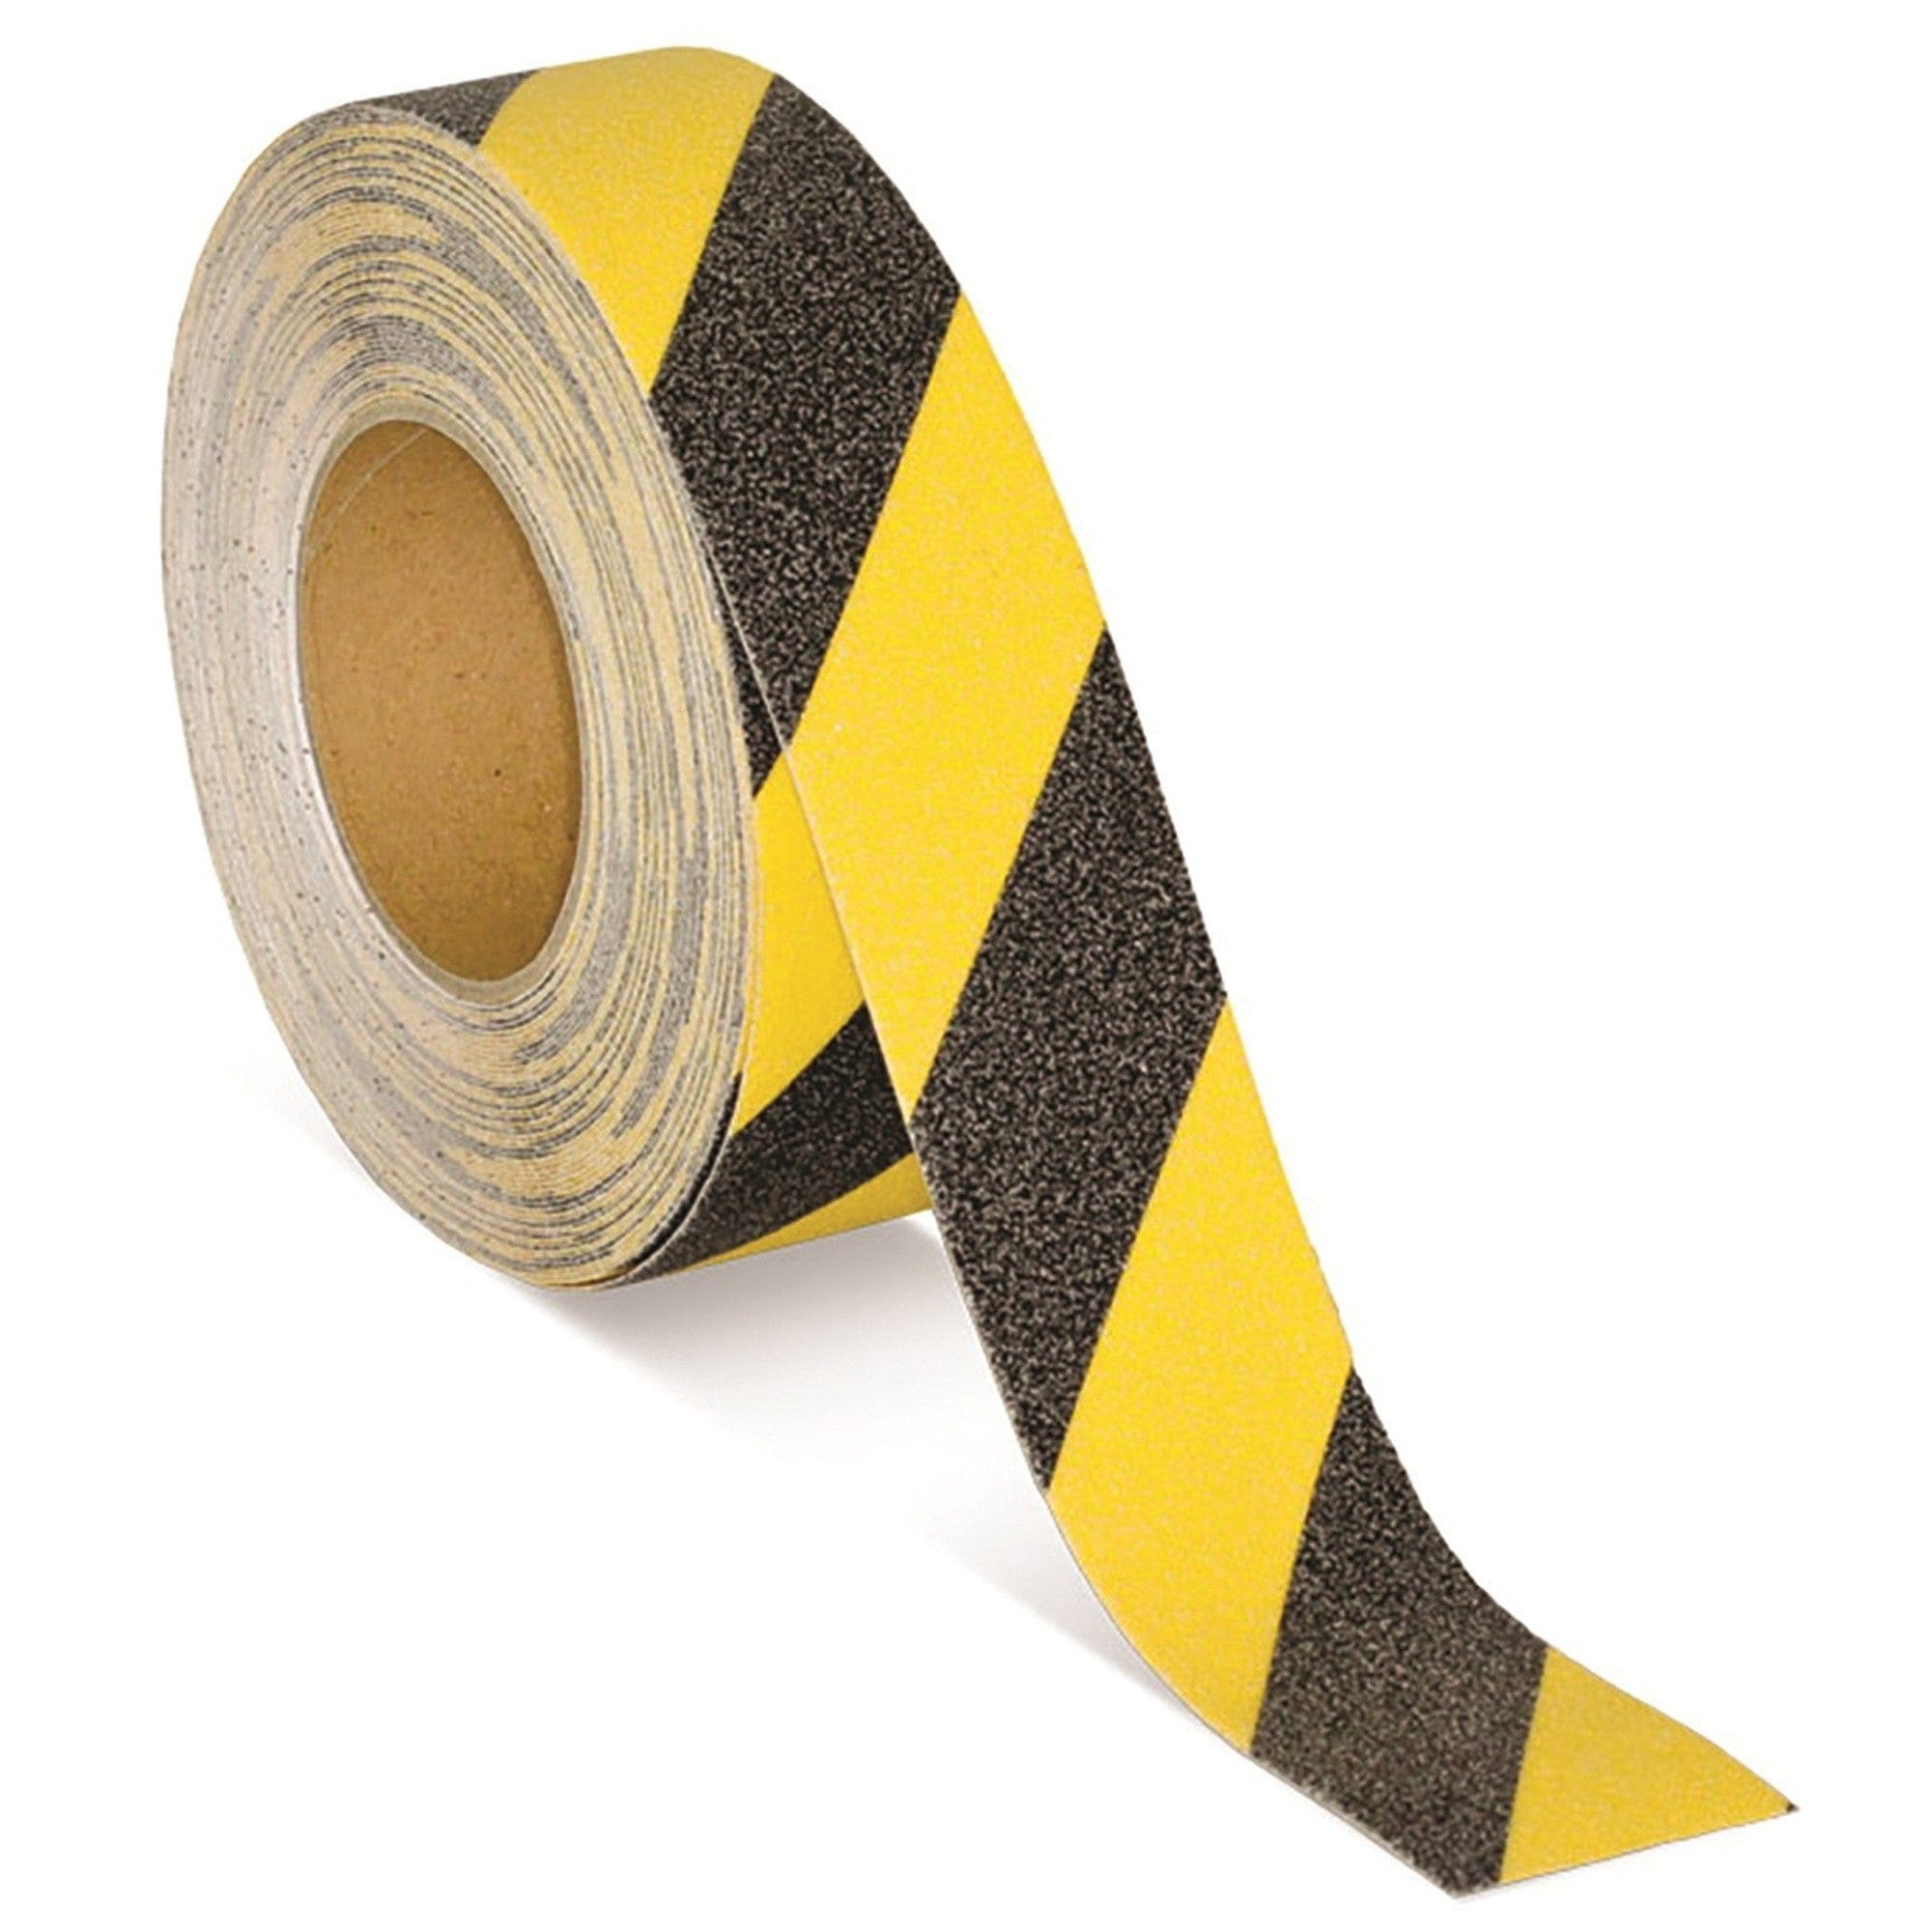 Black 10m Anti-Slip Tape for Slip-Resistant Surfaces | Supply Master Ghana, Accra Brackets & Braces Buy Tools hardware Building materials